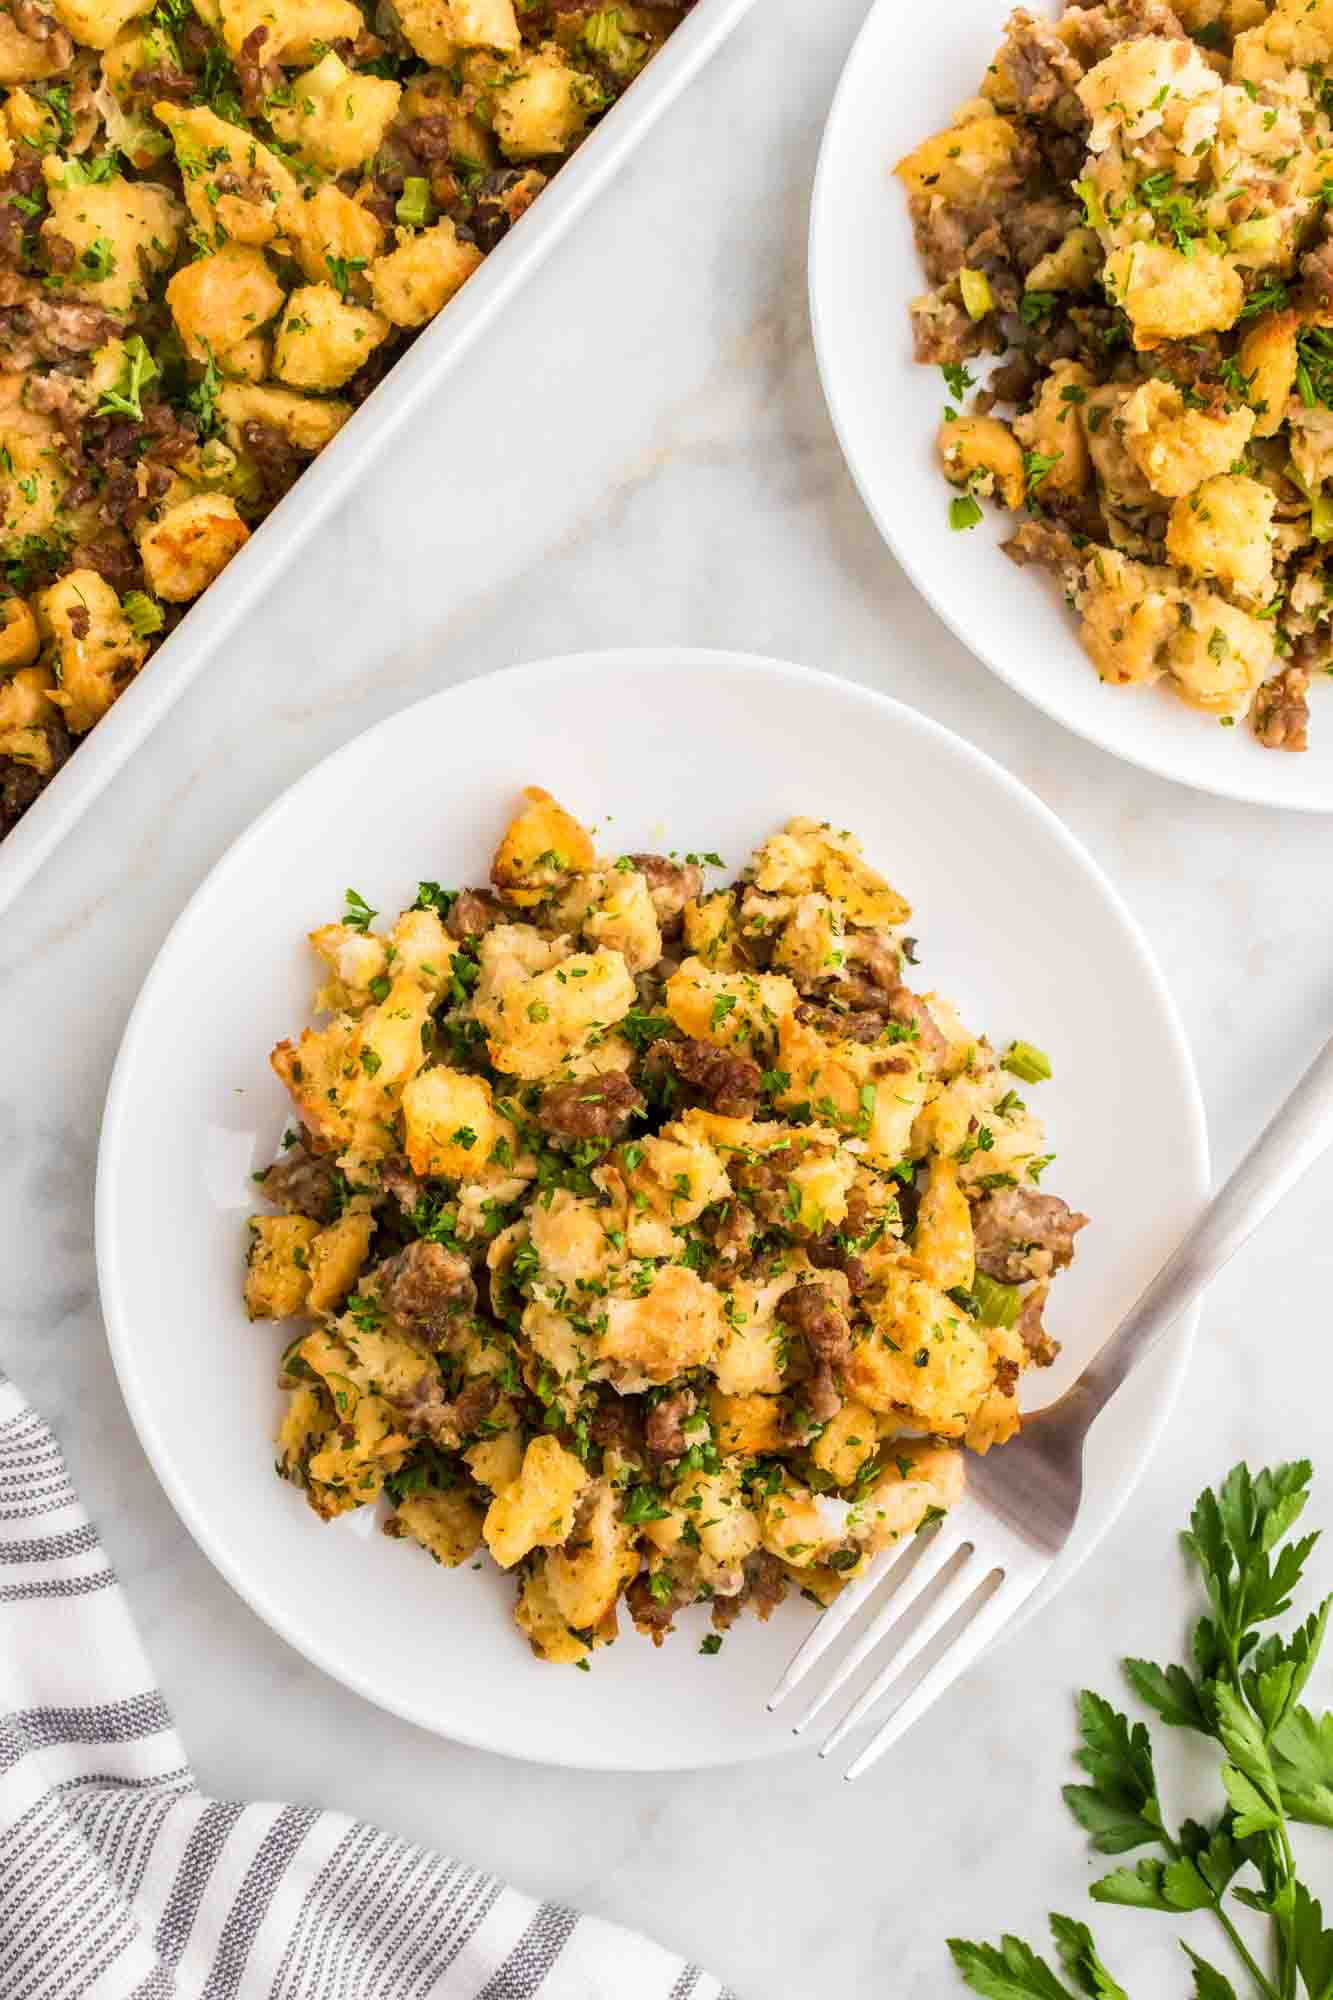 Plated sausage stuffing